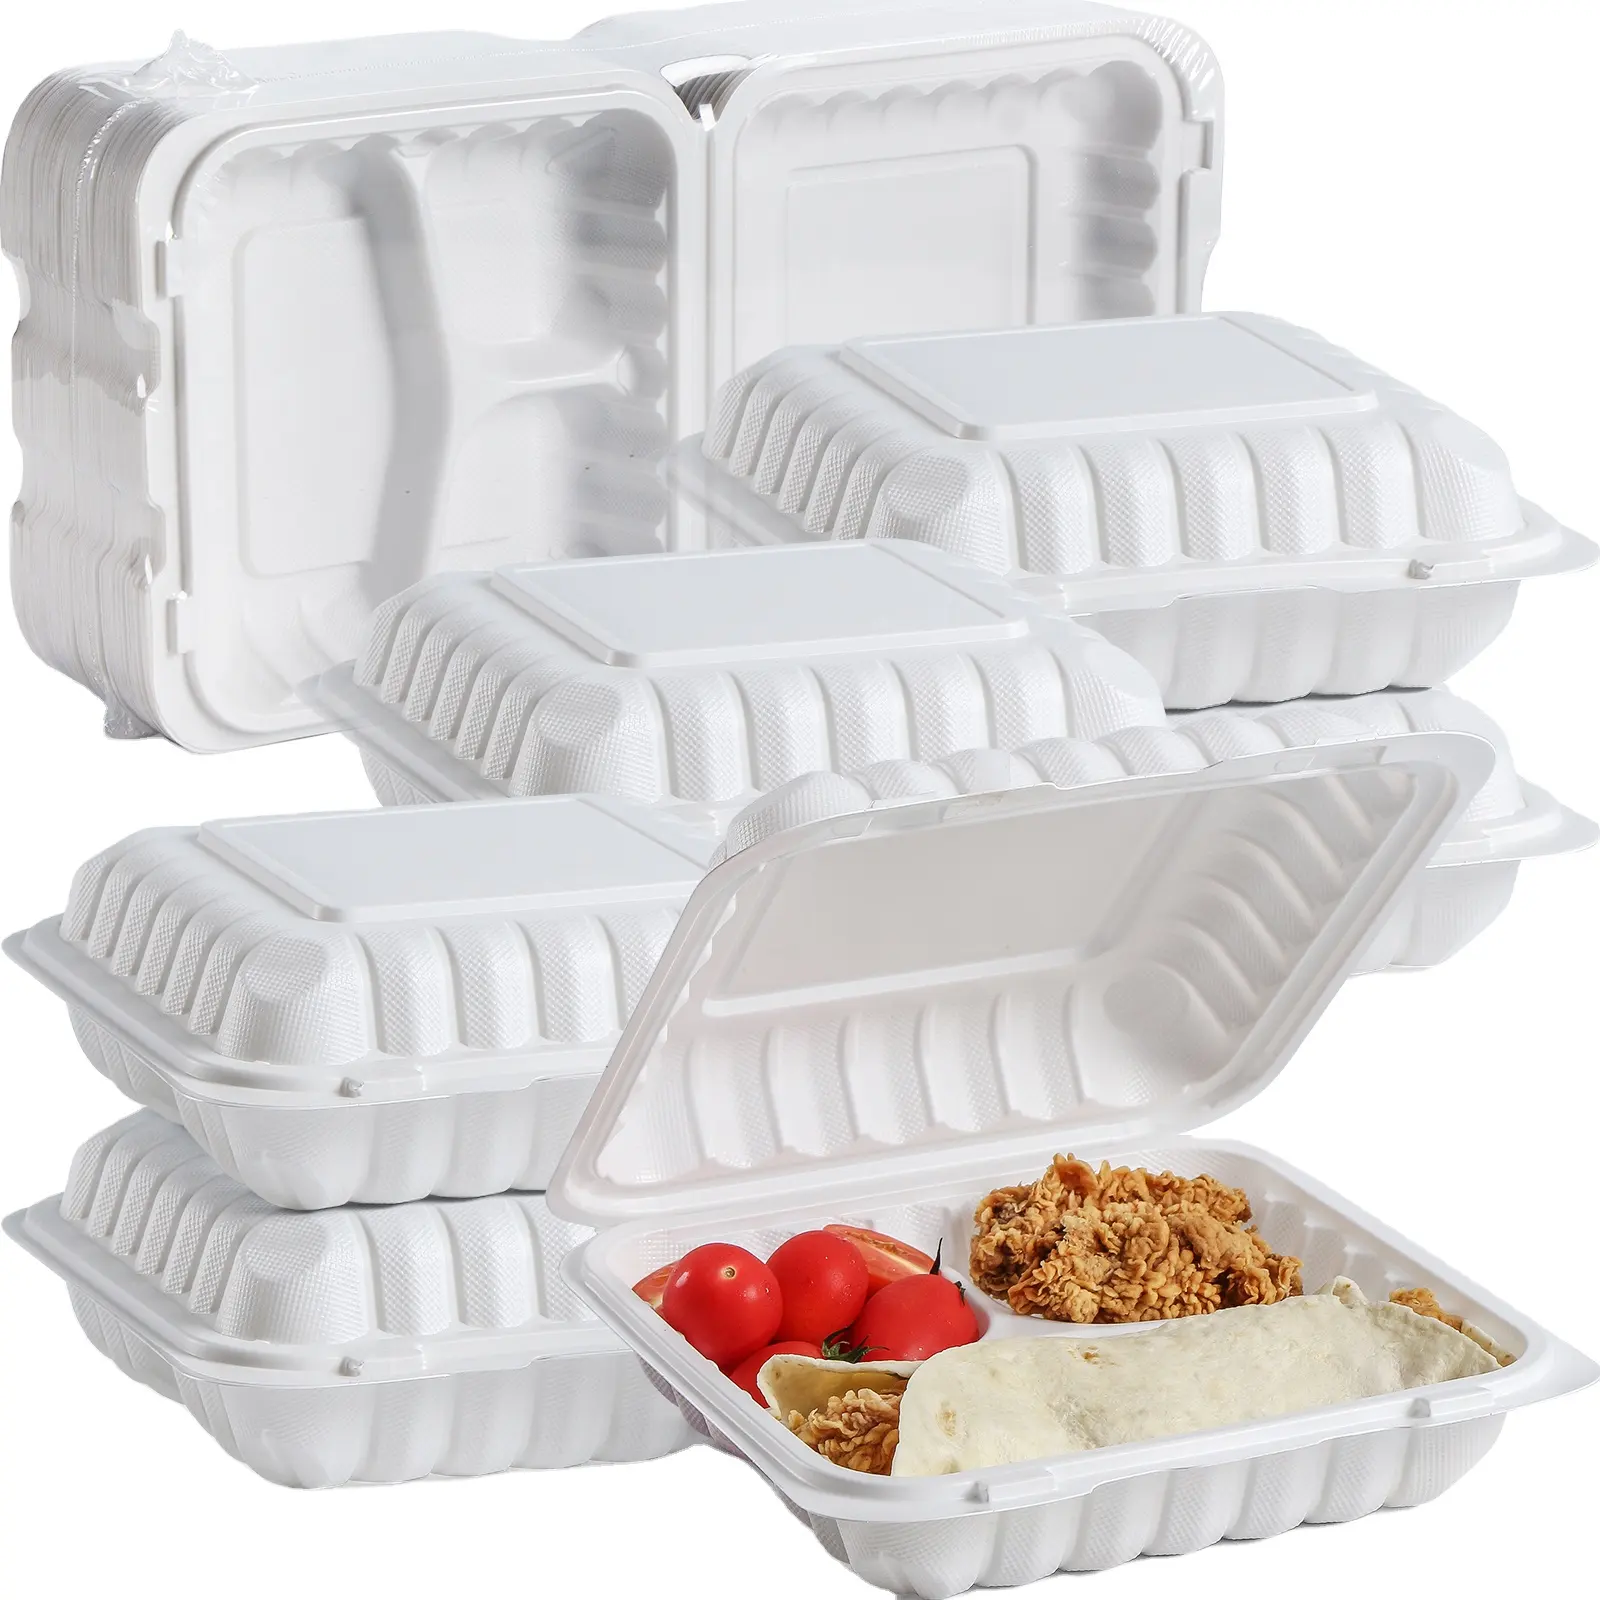 Disposable Compostable Restaurant Togo Container Plastic Plates Salad 3 Compartment Food Boxes Eco To Go Containers With Lids